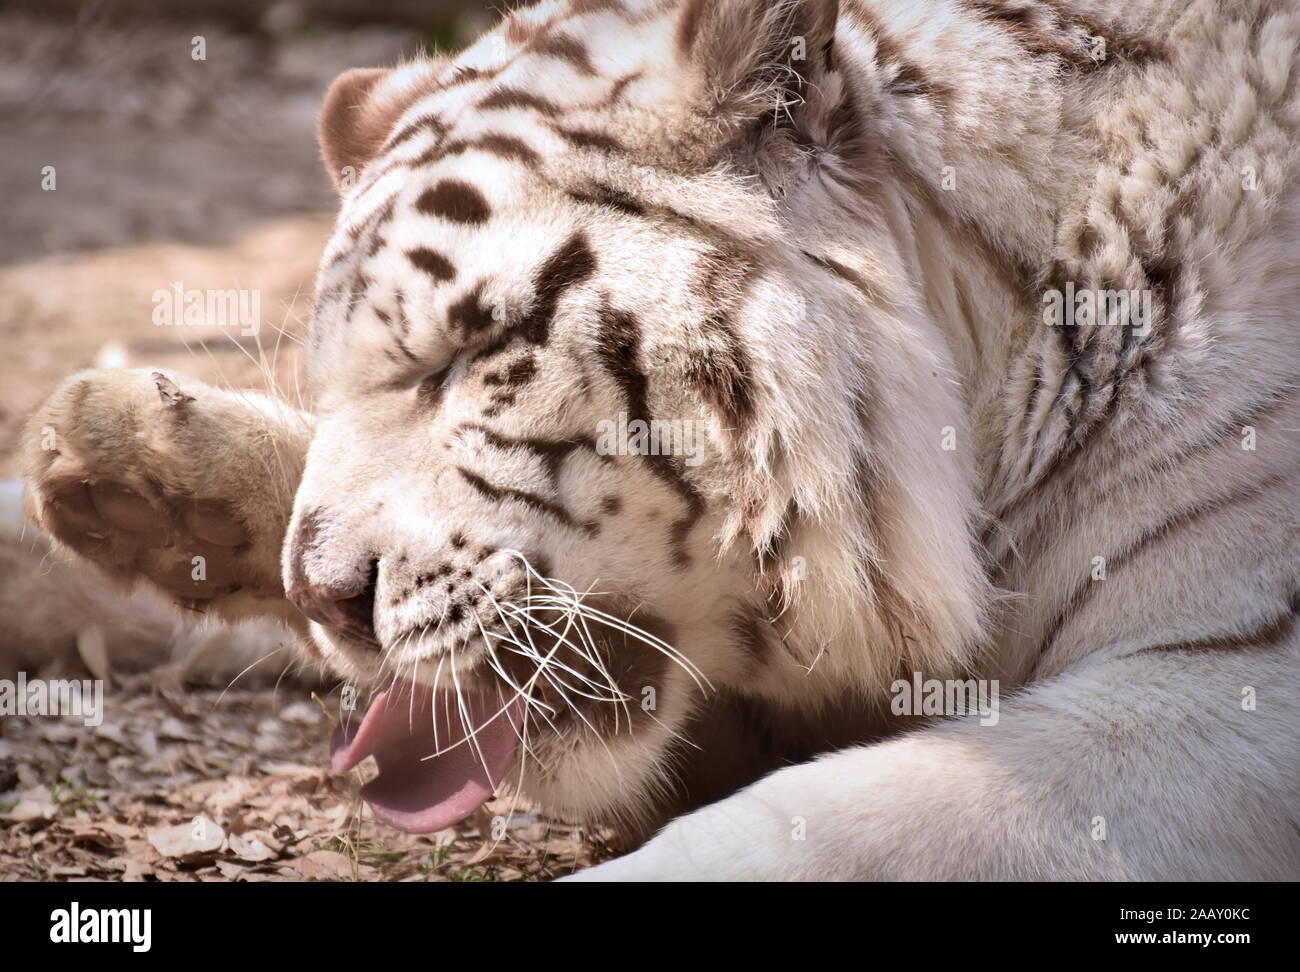 White bengal tiger rolling tongue Stock Photo